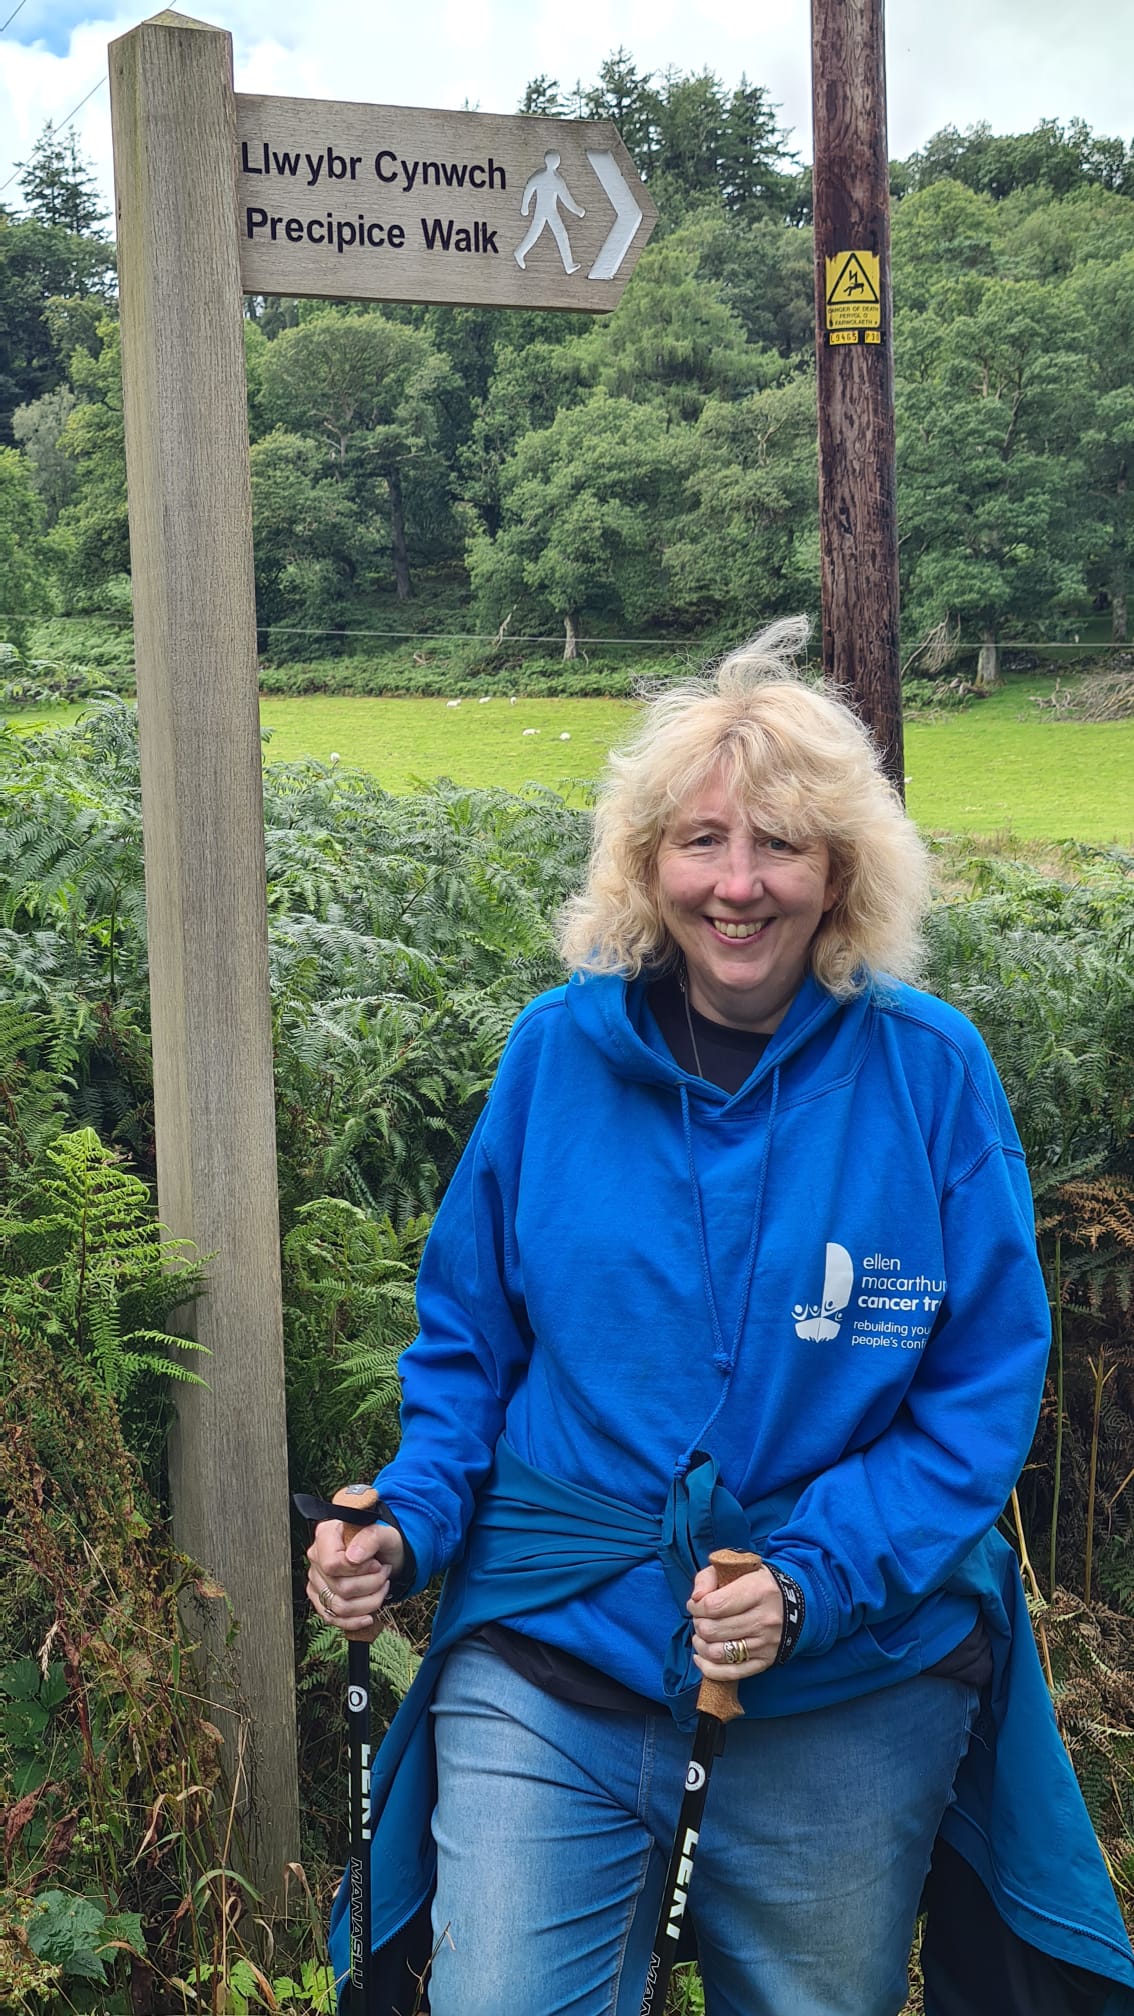 Katharine on her walk in Wales, smiling at the camera while wearing a blue Ellen MacArthur Cancer Trust hoodie, standing beside a sign that says Precipice Walk in English and Welsh